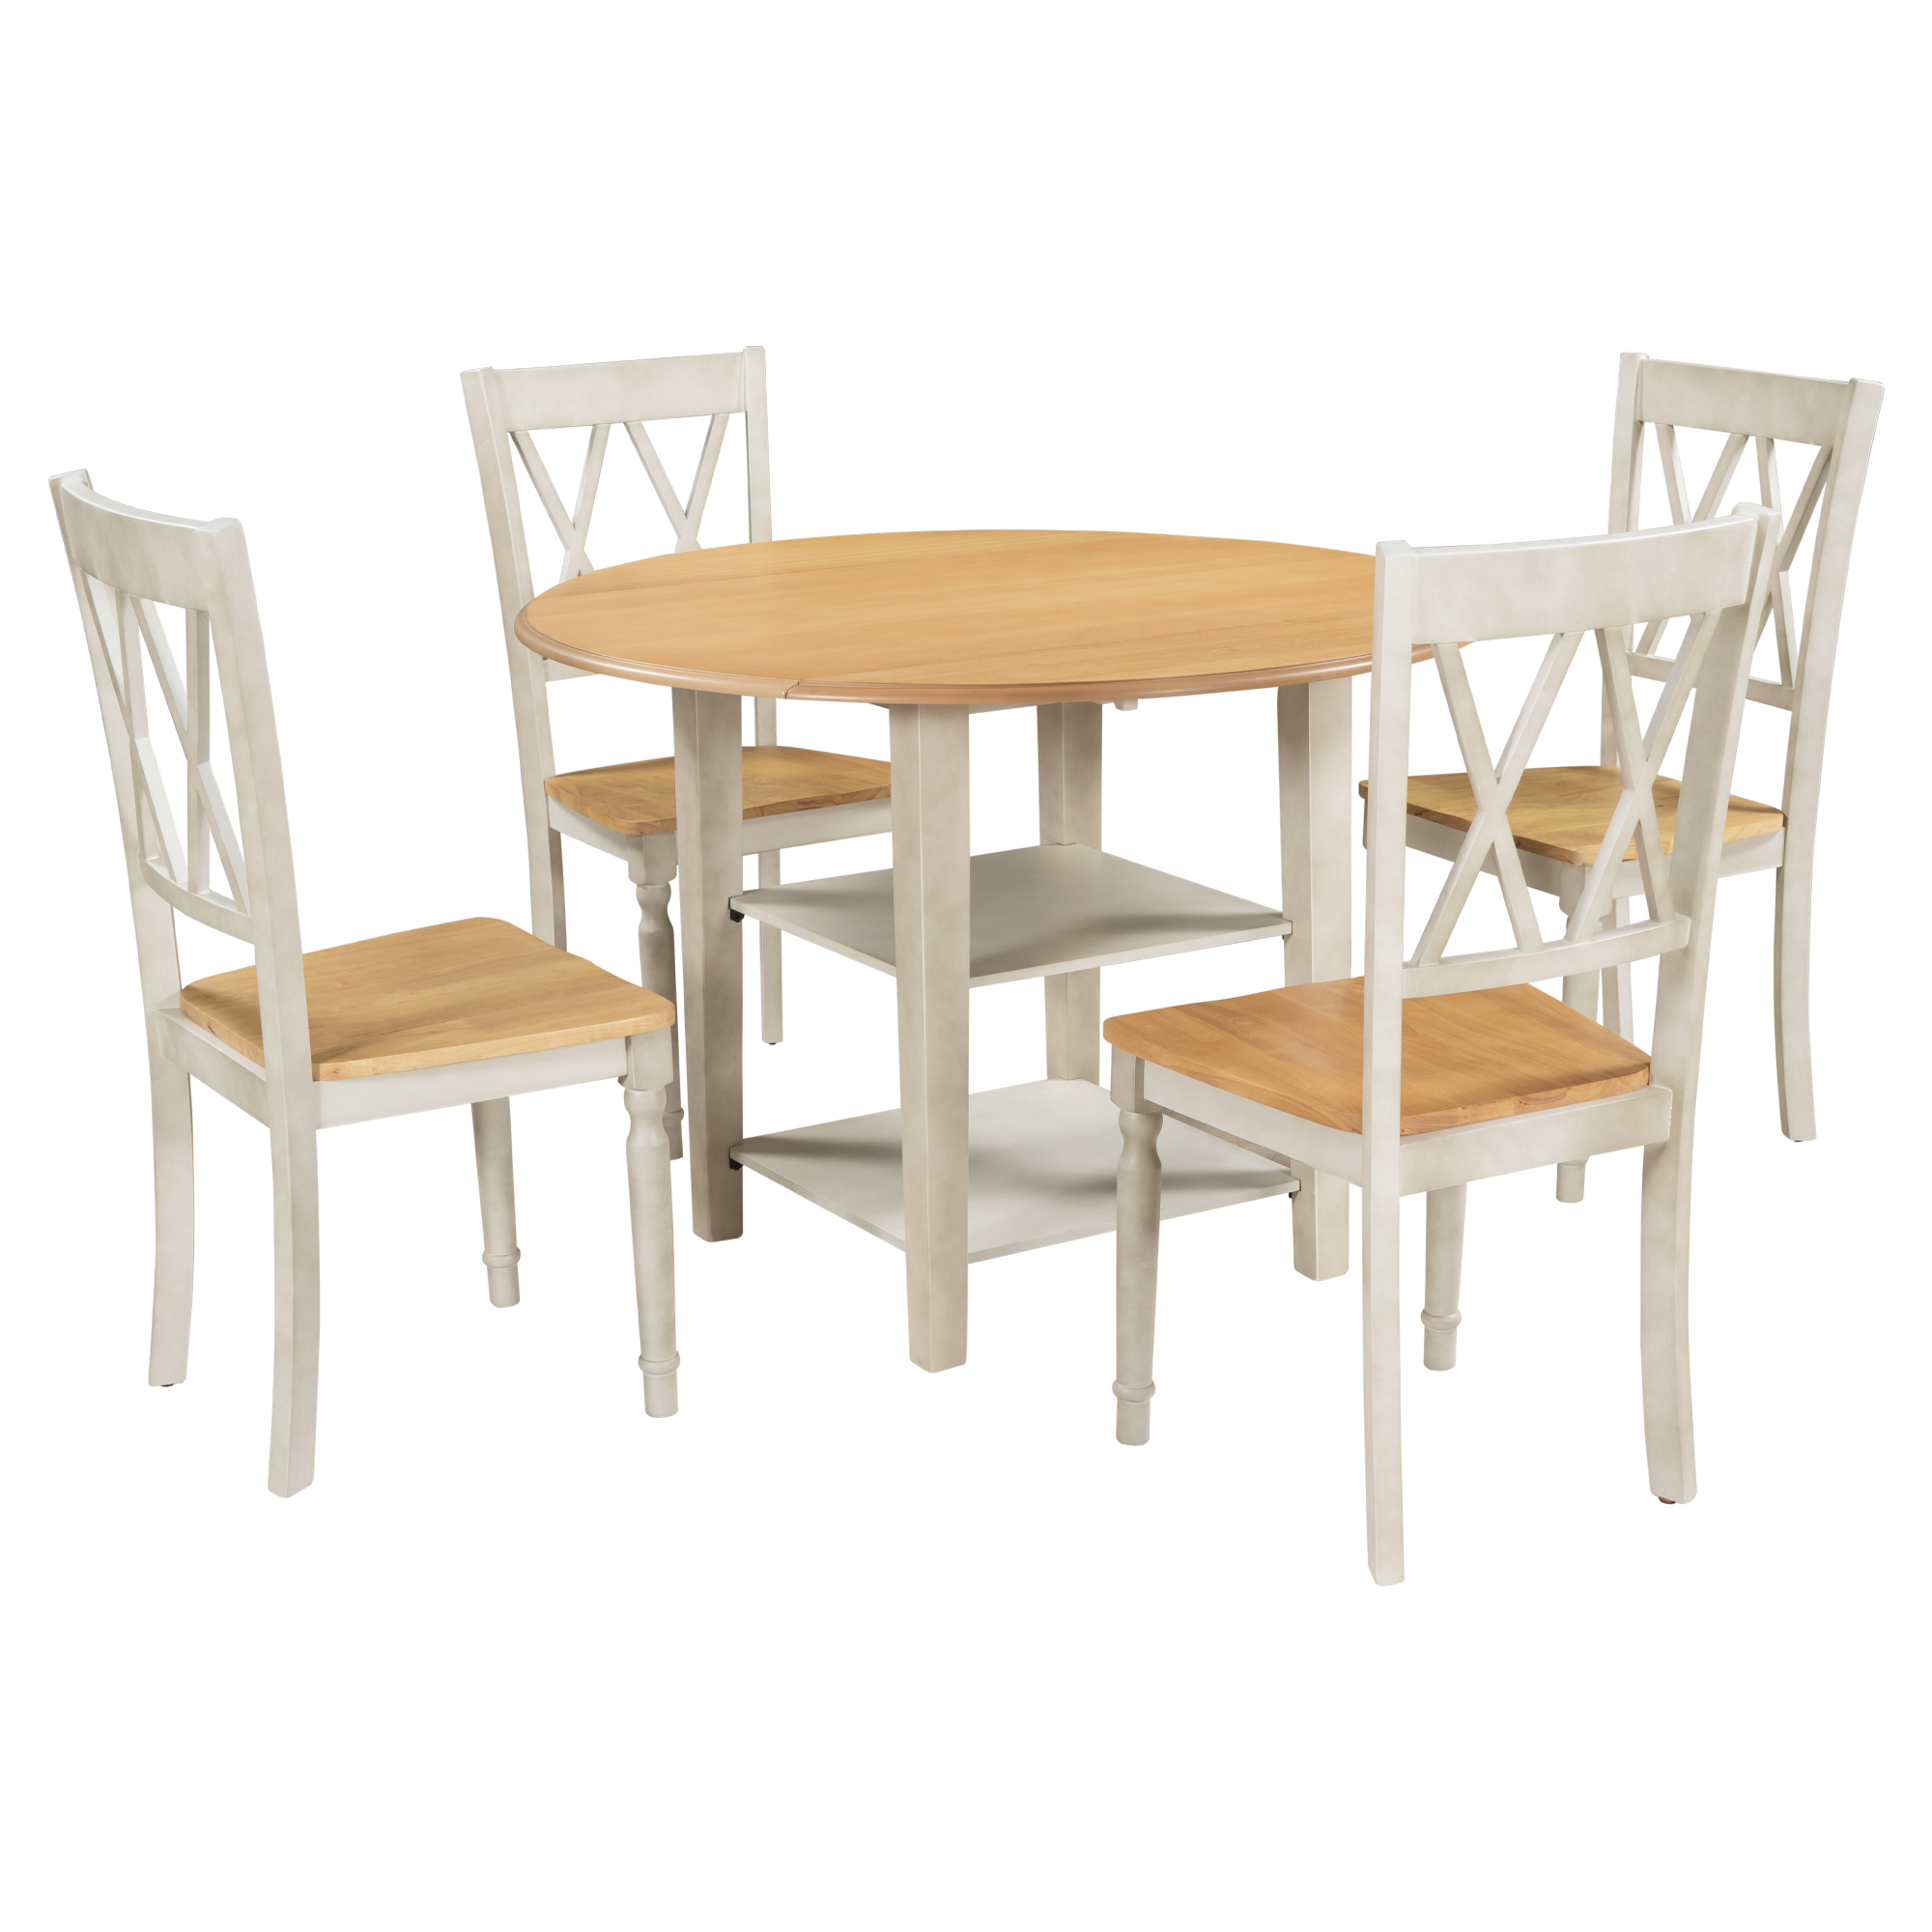 Farmhouse Wooden Round Dining Table Set - SH000207AAL